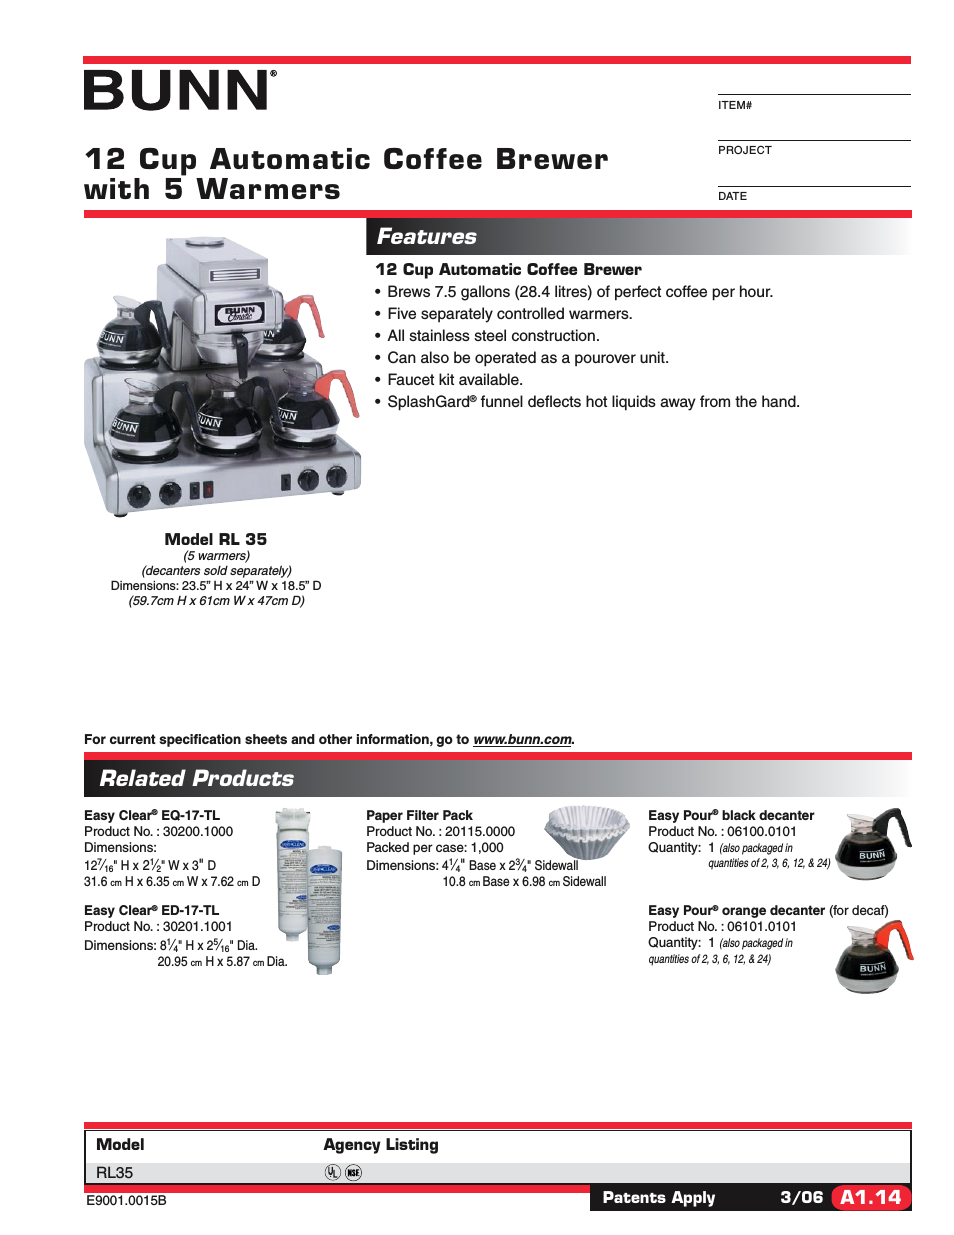 12 CUP AUTOMATIC COFFEE BREWER RL35